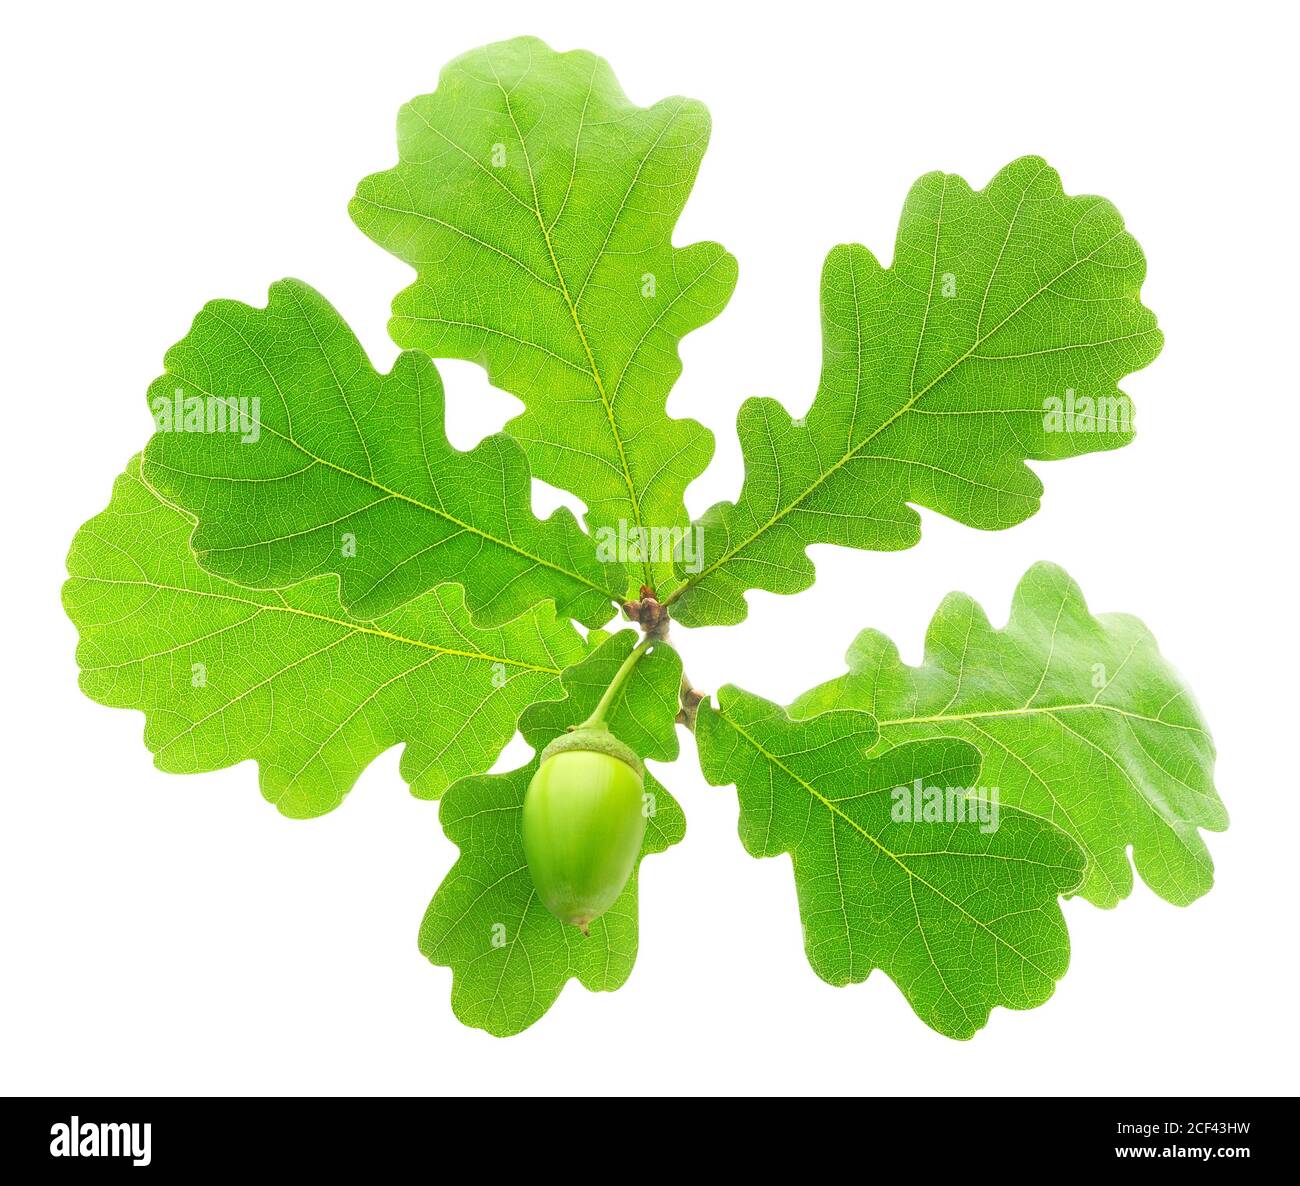 Oak tree branch with leaves and acorn isolated on white background Stock Photo